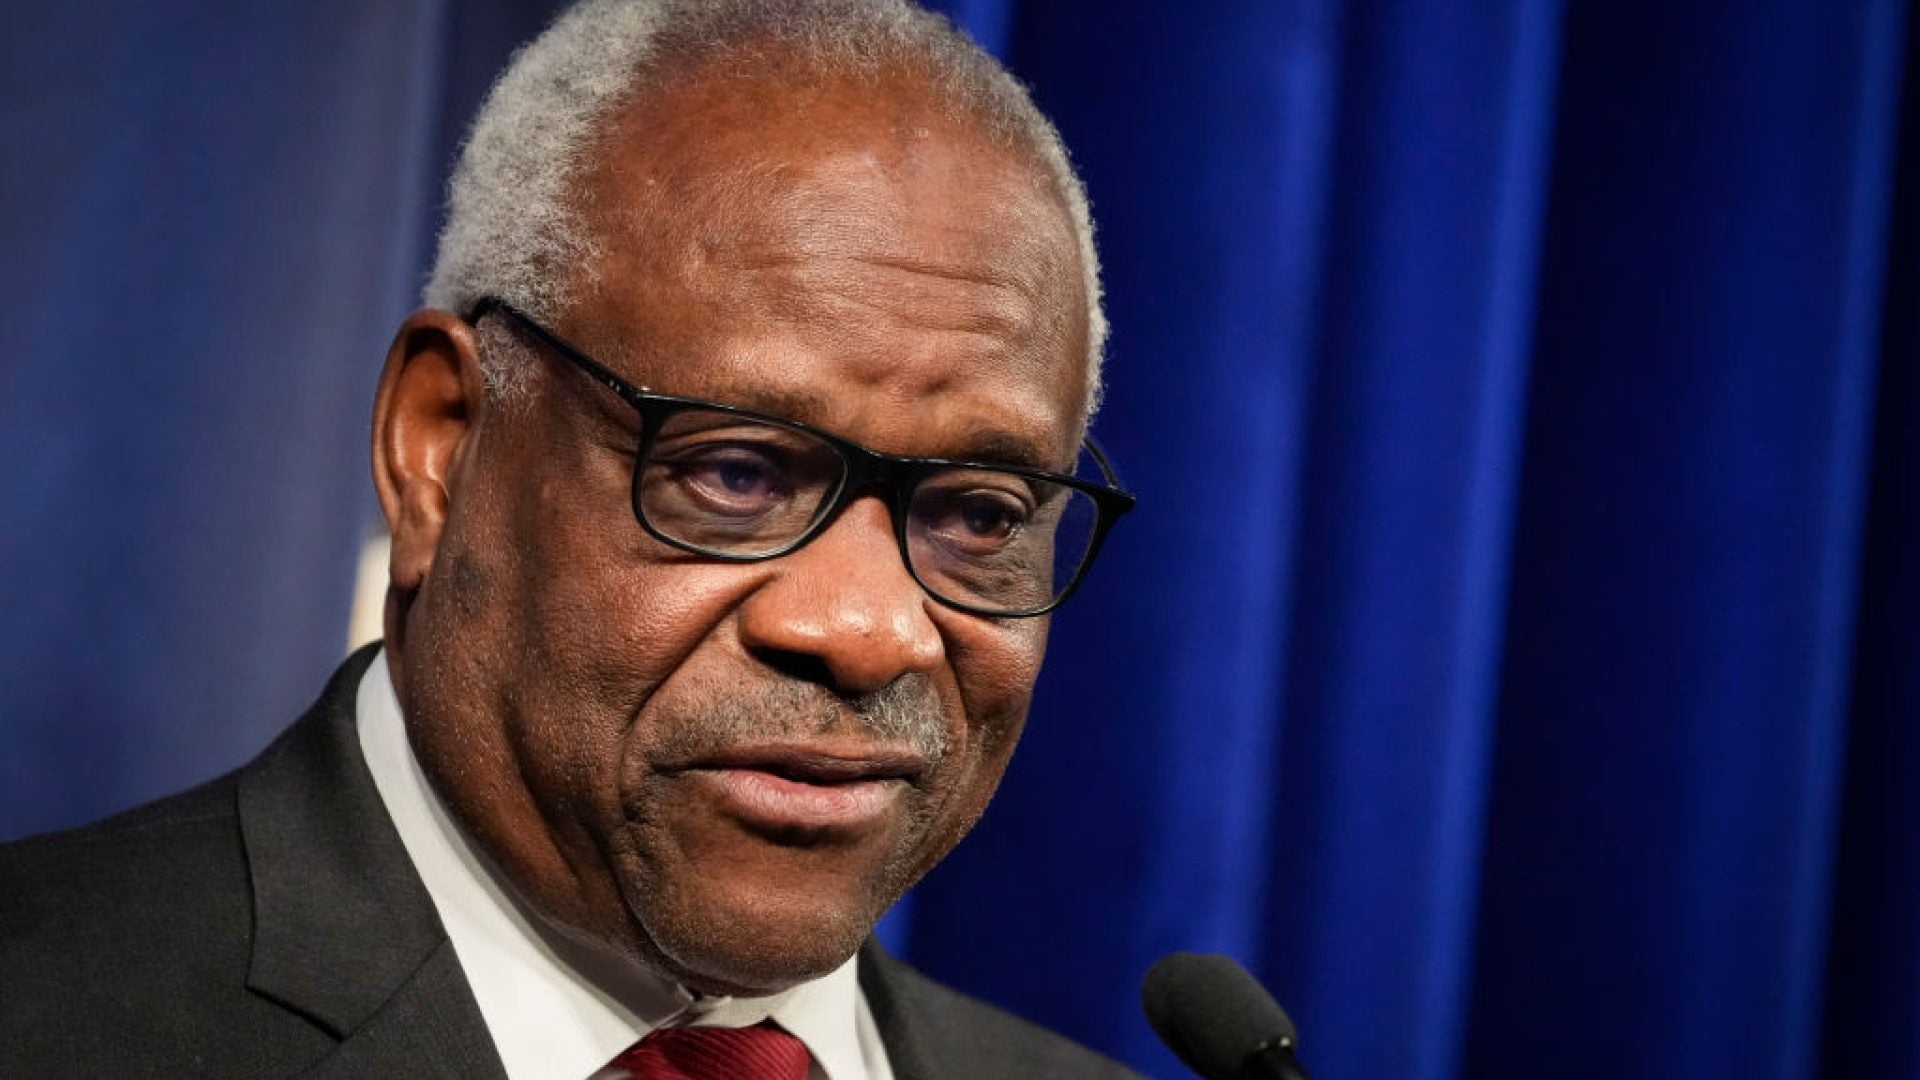 Justice Thomas Worries ‘Cancel Culture’ and ‘Court-Packing’ Jeopardizes Institutions